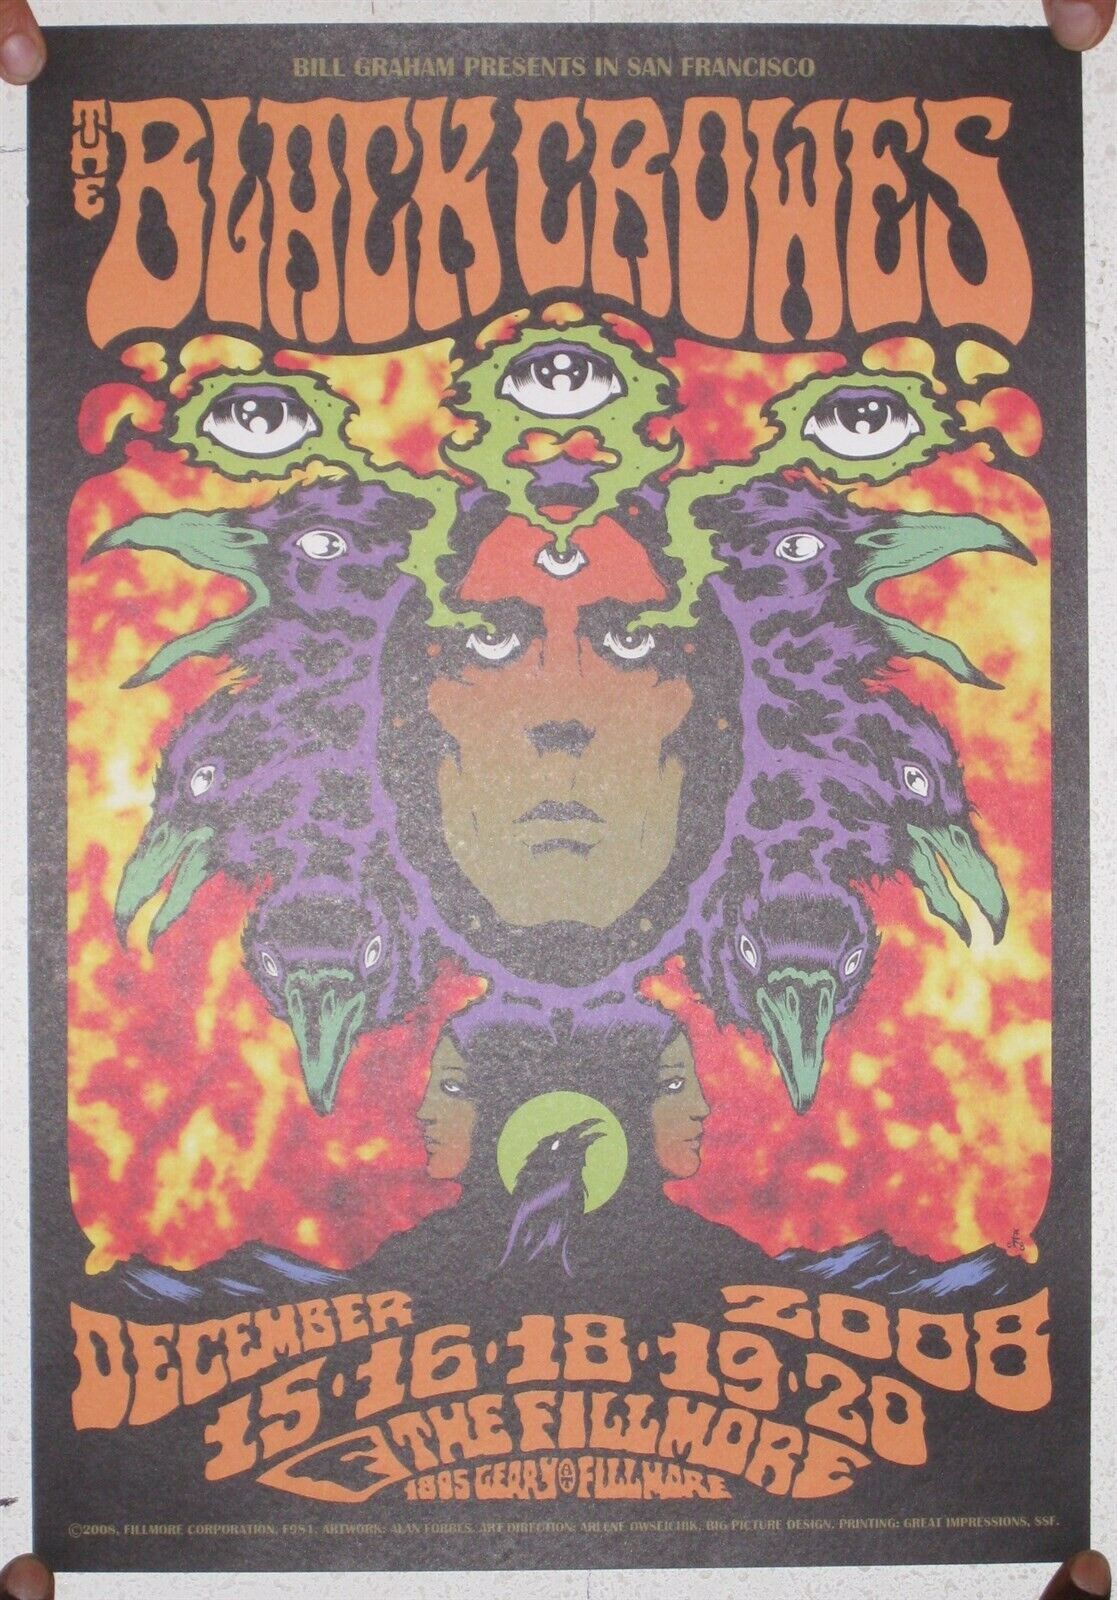 The Black Crowes Poster December 15-20 2008 Fillmore San Francisco Crows